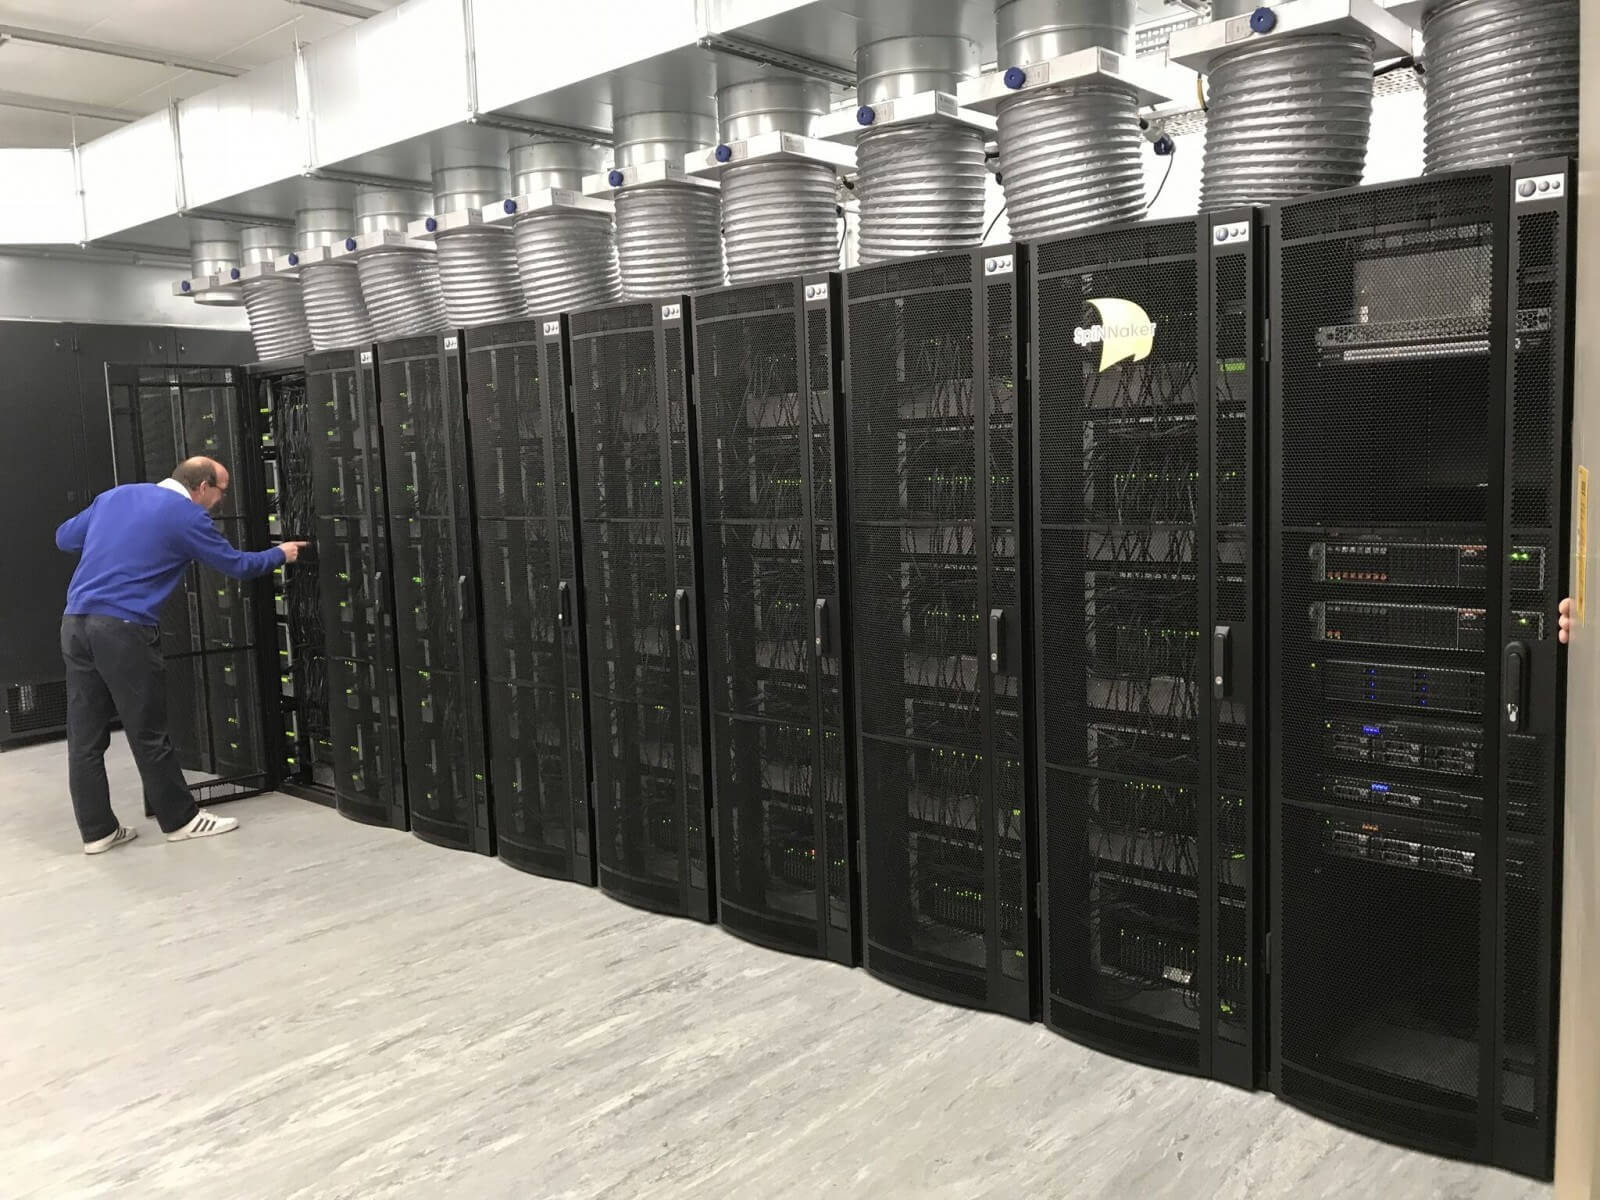 World's largest neuromorphic supercomputer is switched on